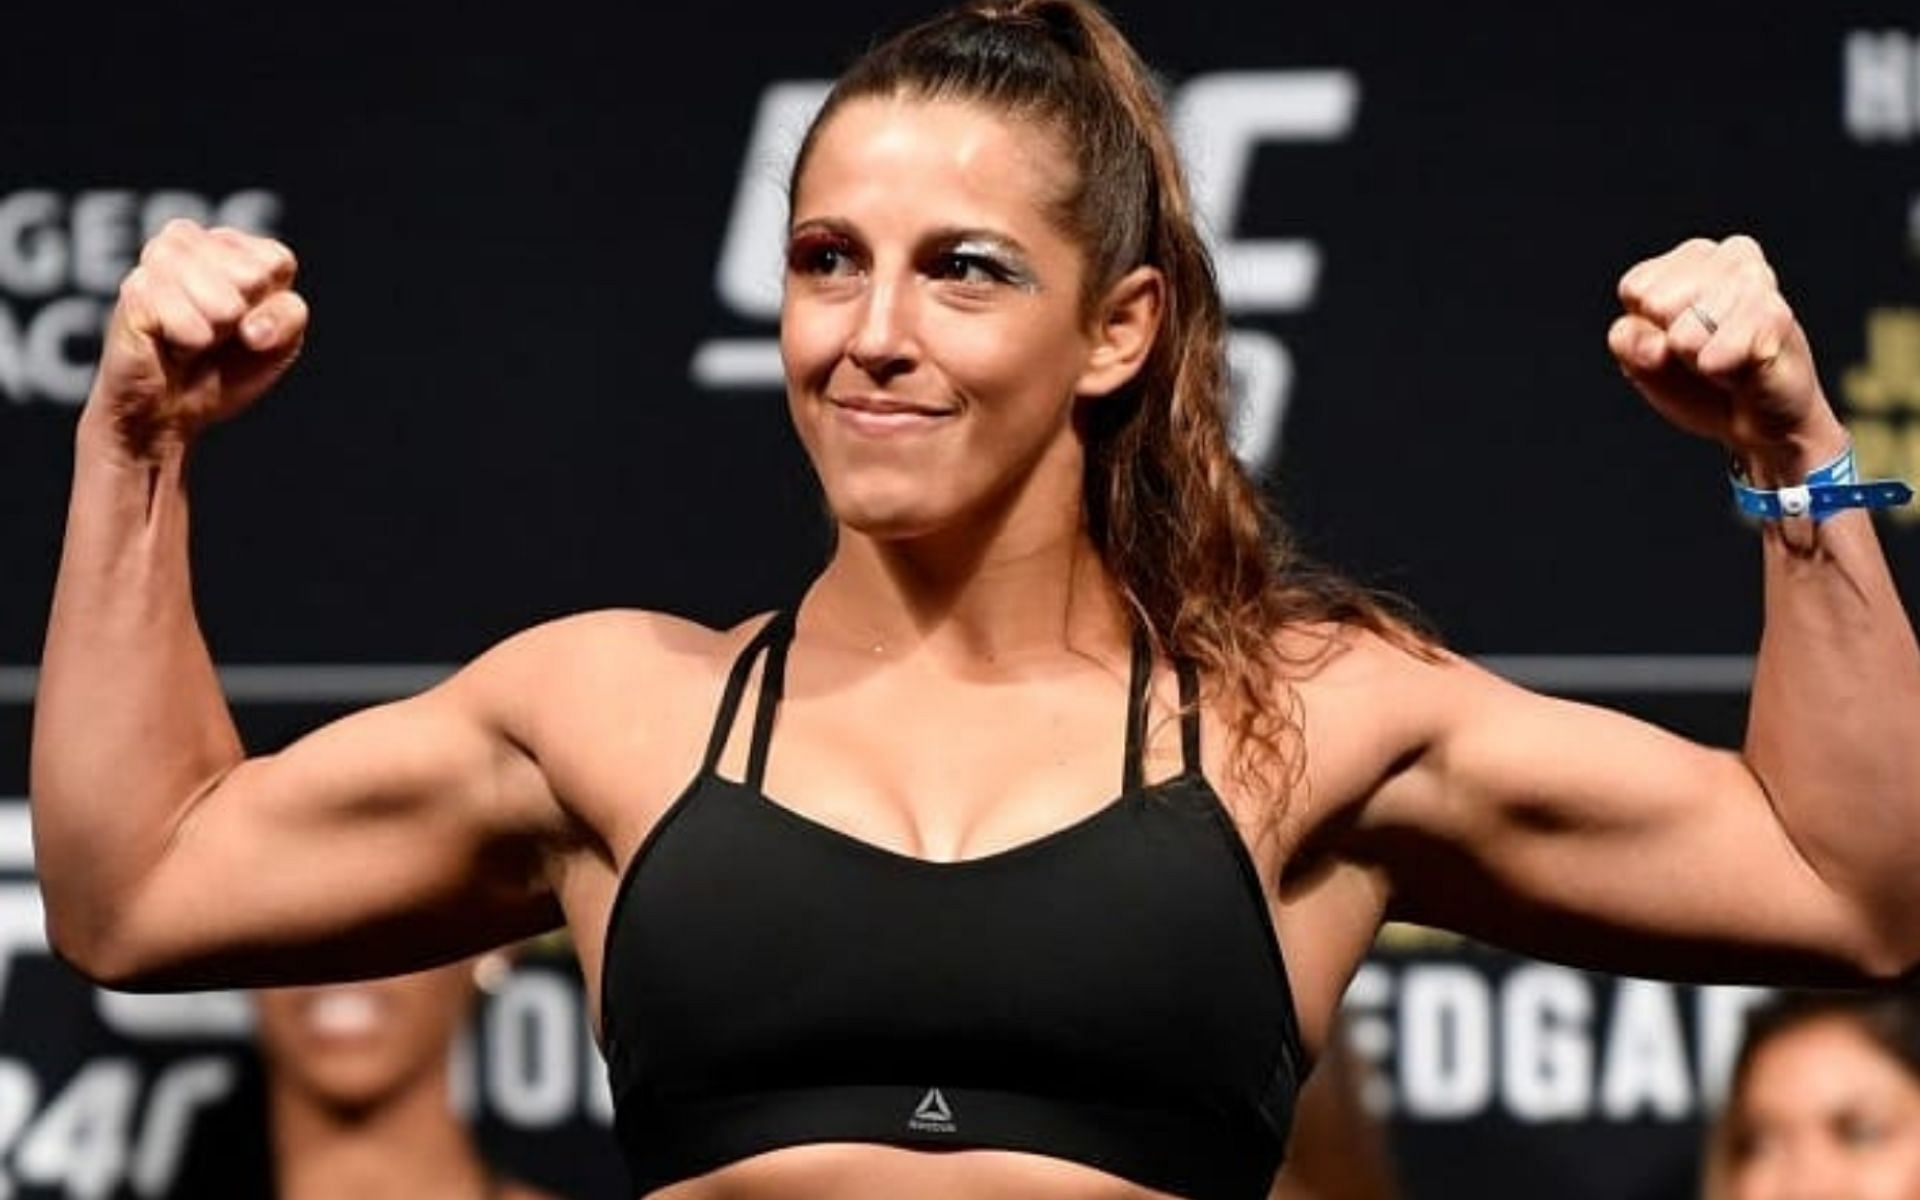 Felicia Spencer announced her retirement from MMA.